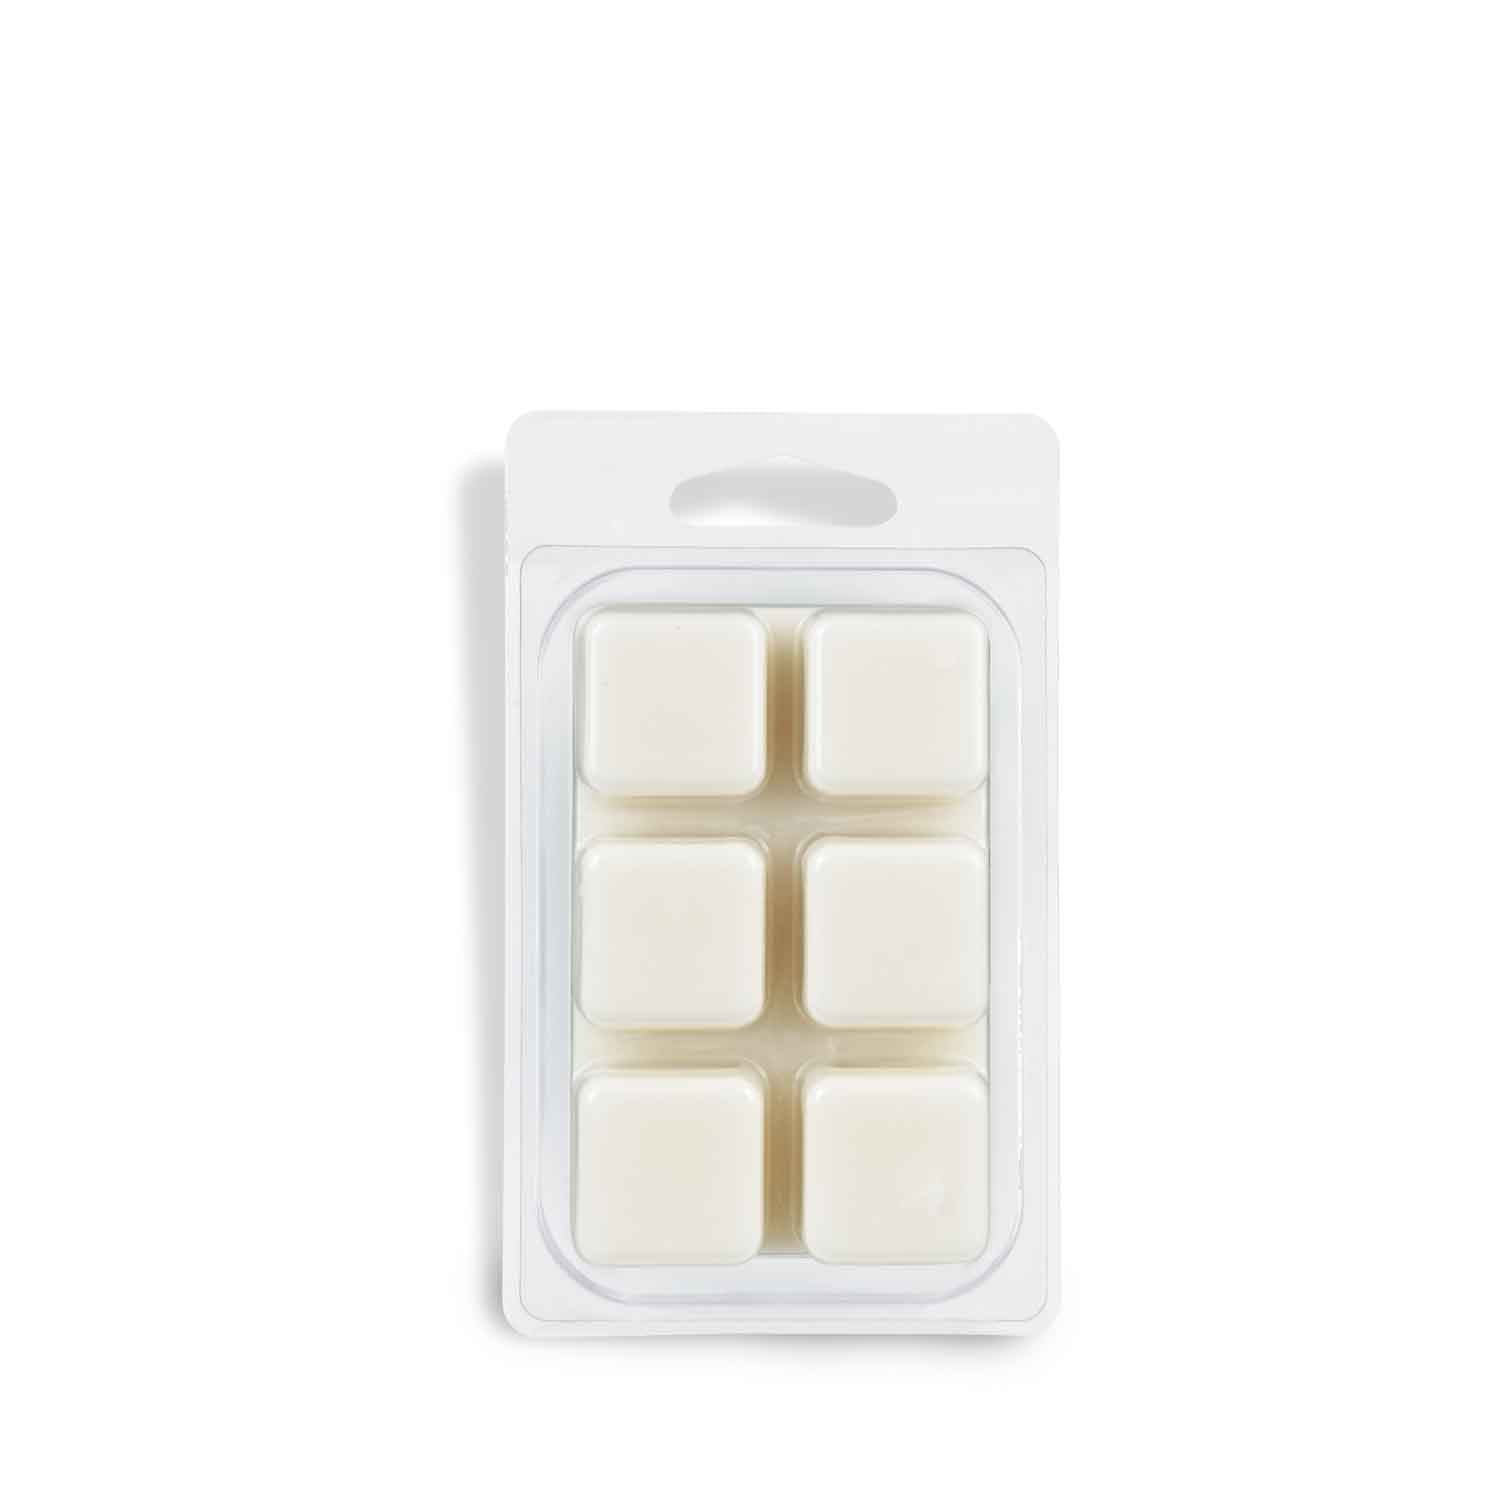 A pack of Fresh Linen Scented Wax Melt (2.5 oz) from Tuscany Candle® on a white background.